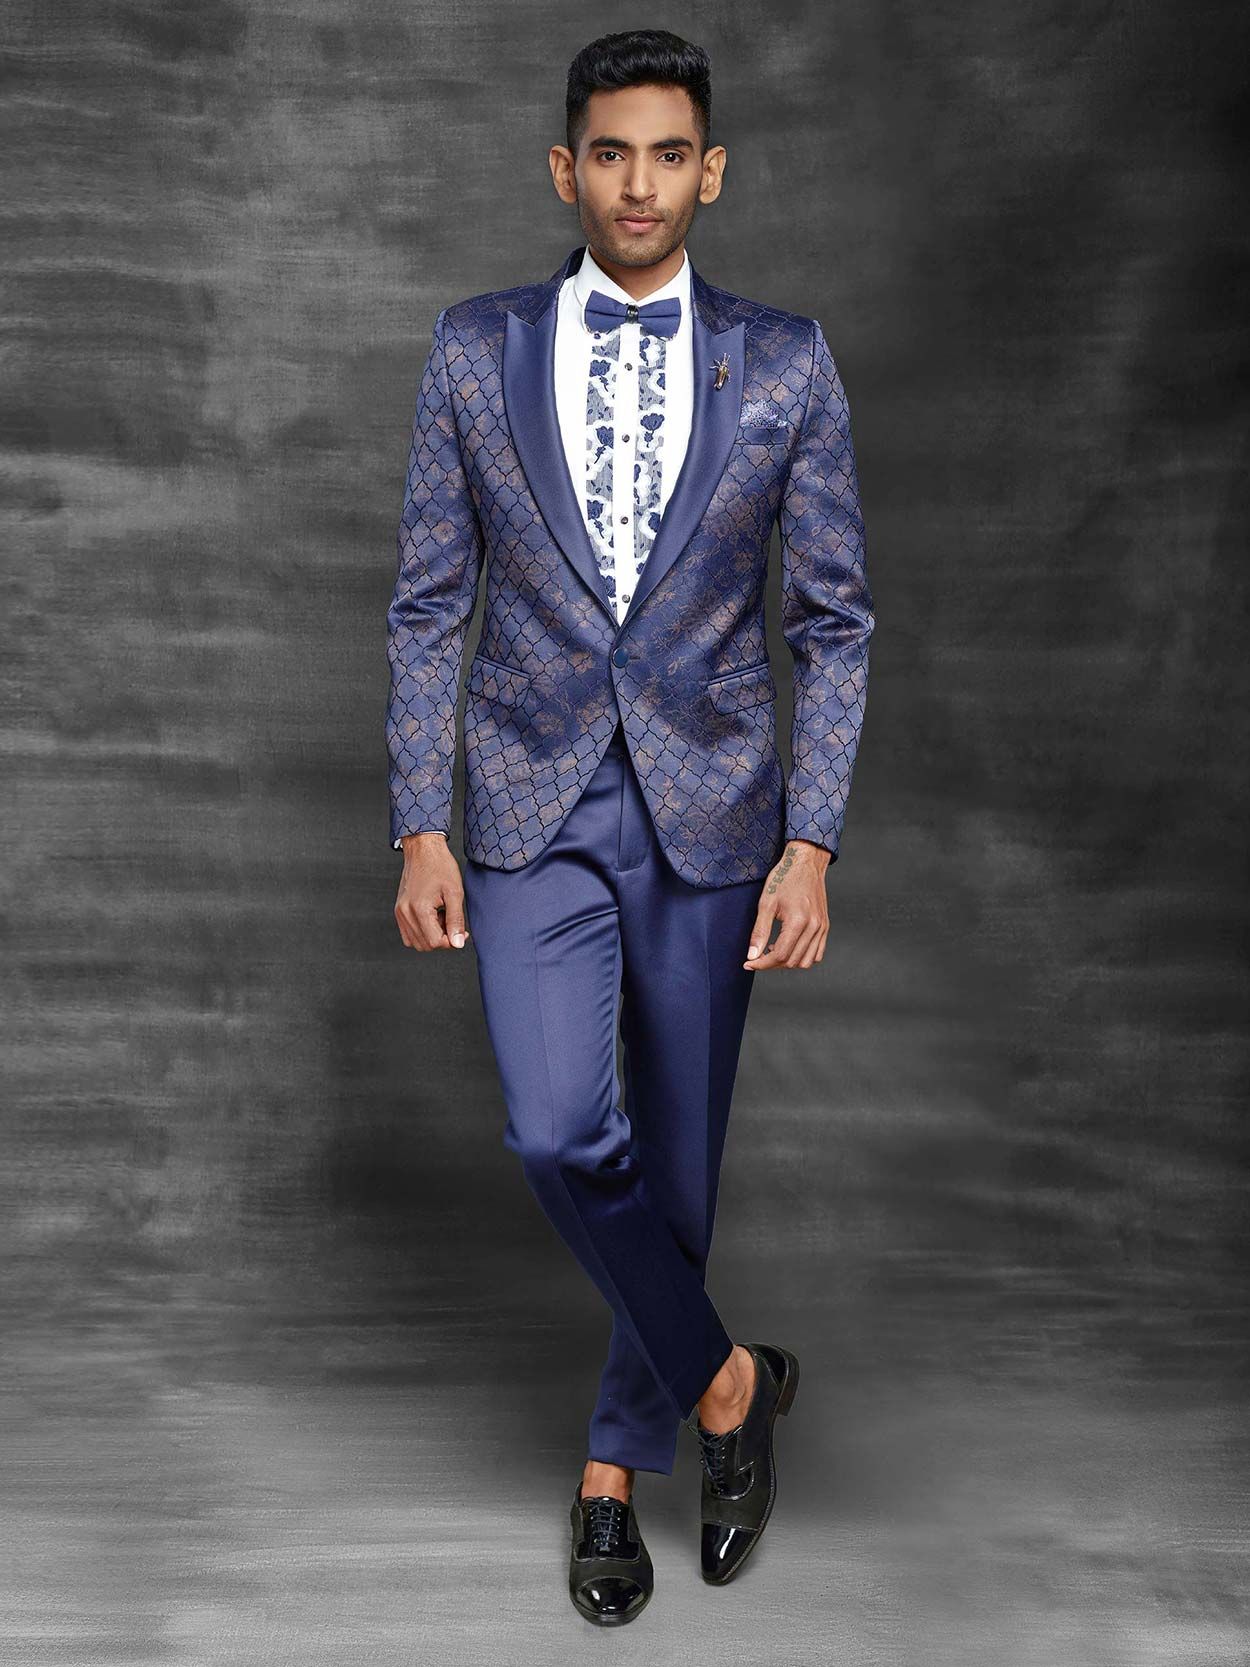 Mens Vintage Style Suits - Get That Classic Look | XPOSED